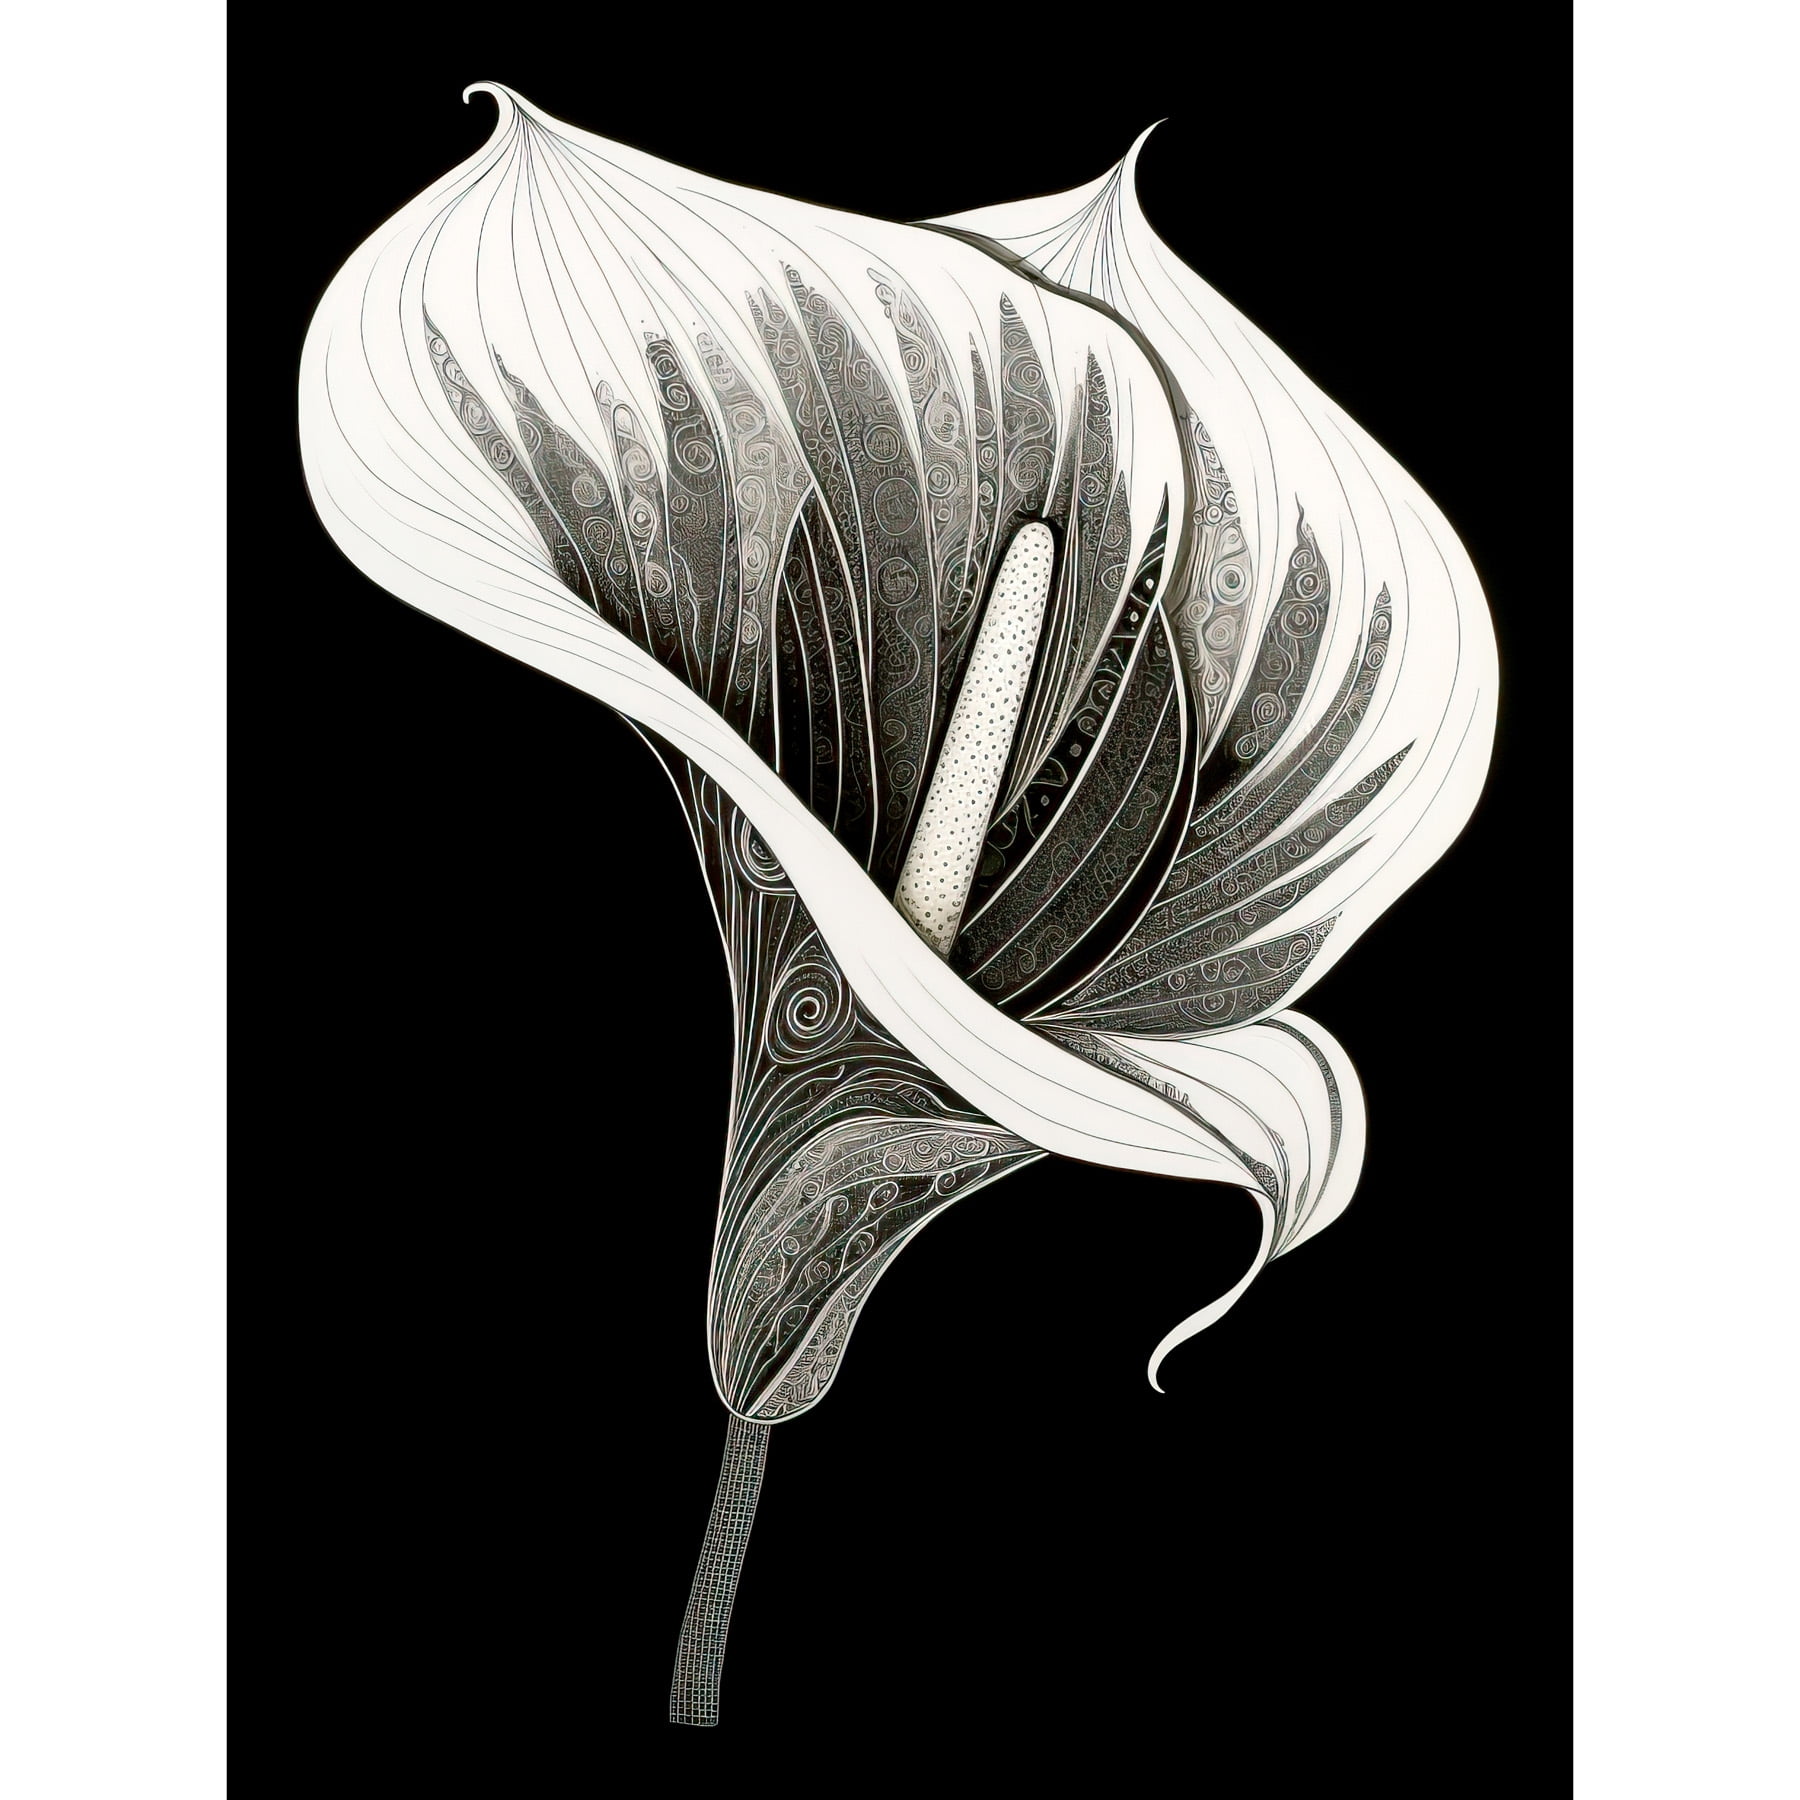  DIY 5D Diamond Painting Kits for Adults Diamond Painting Black  and White Calla Lily Flower Floral Plants for Home Decor 12 X 16 Inch